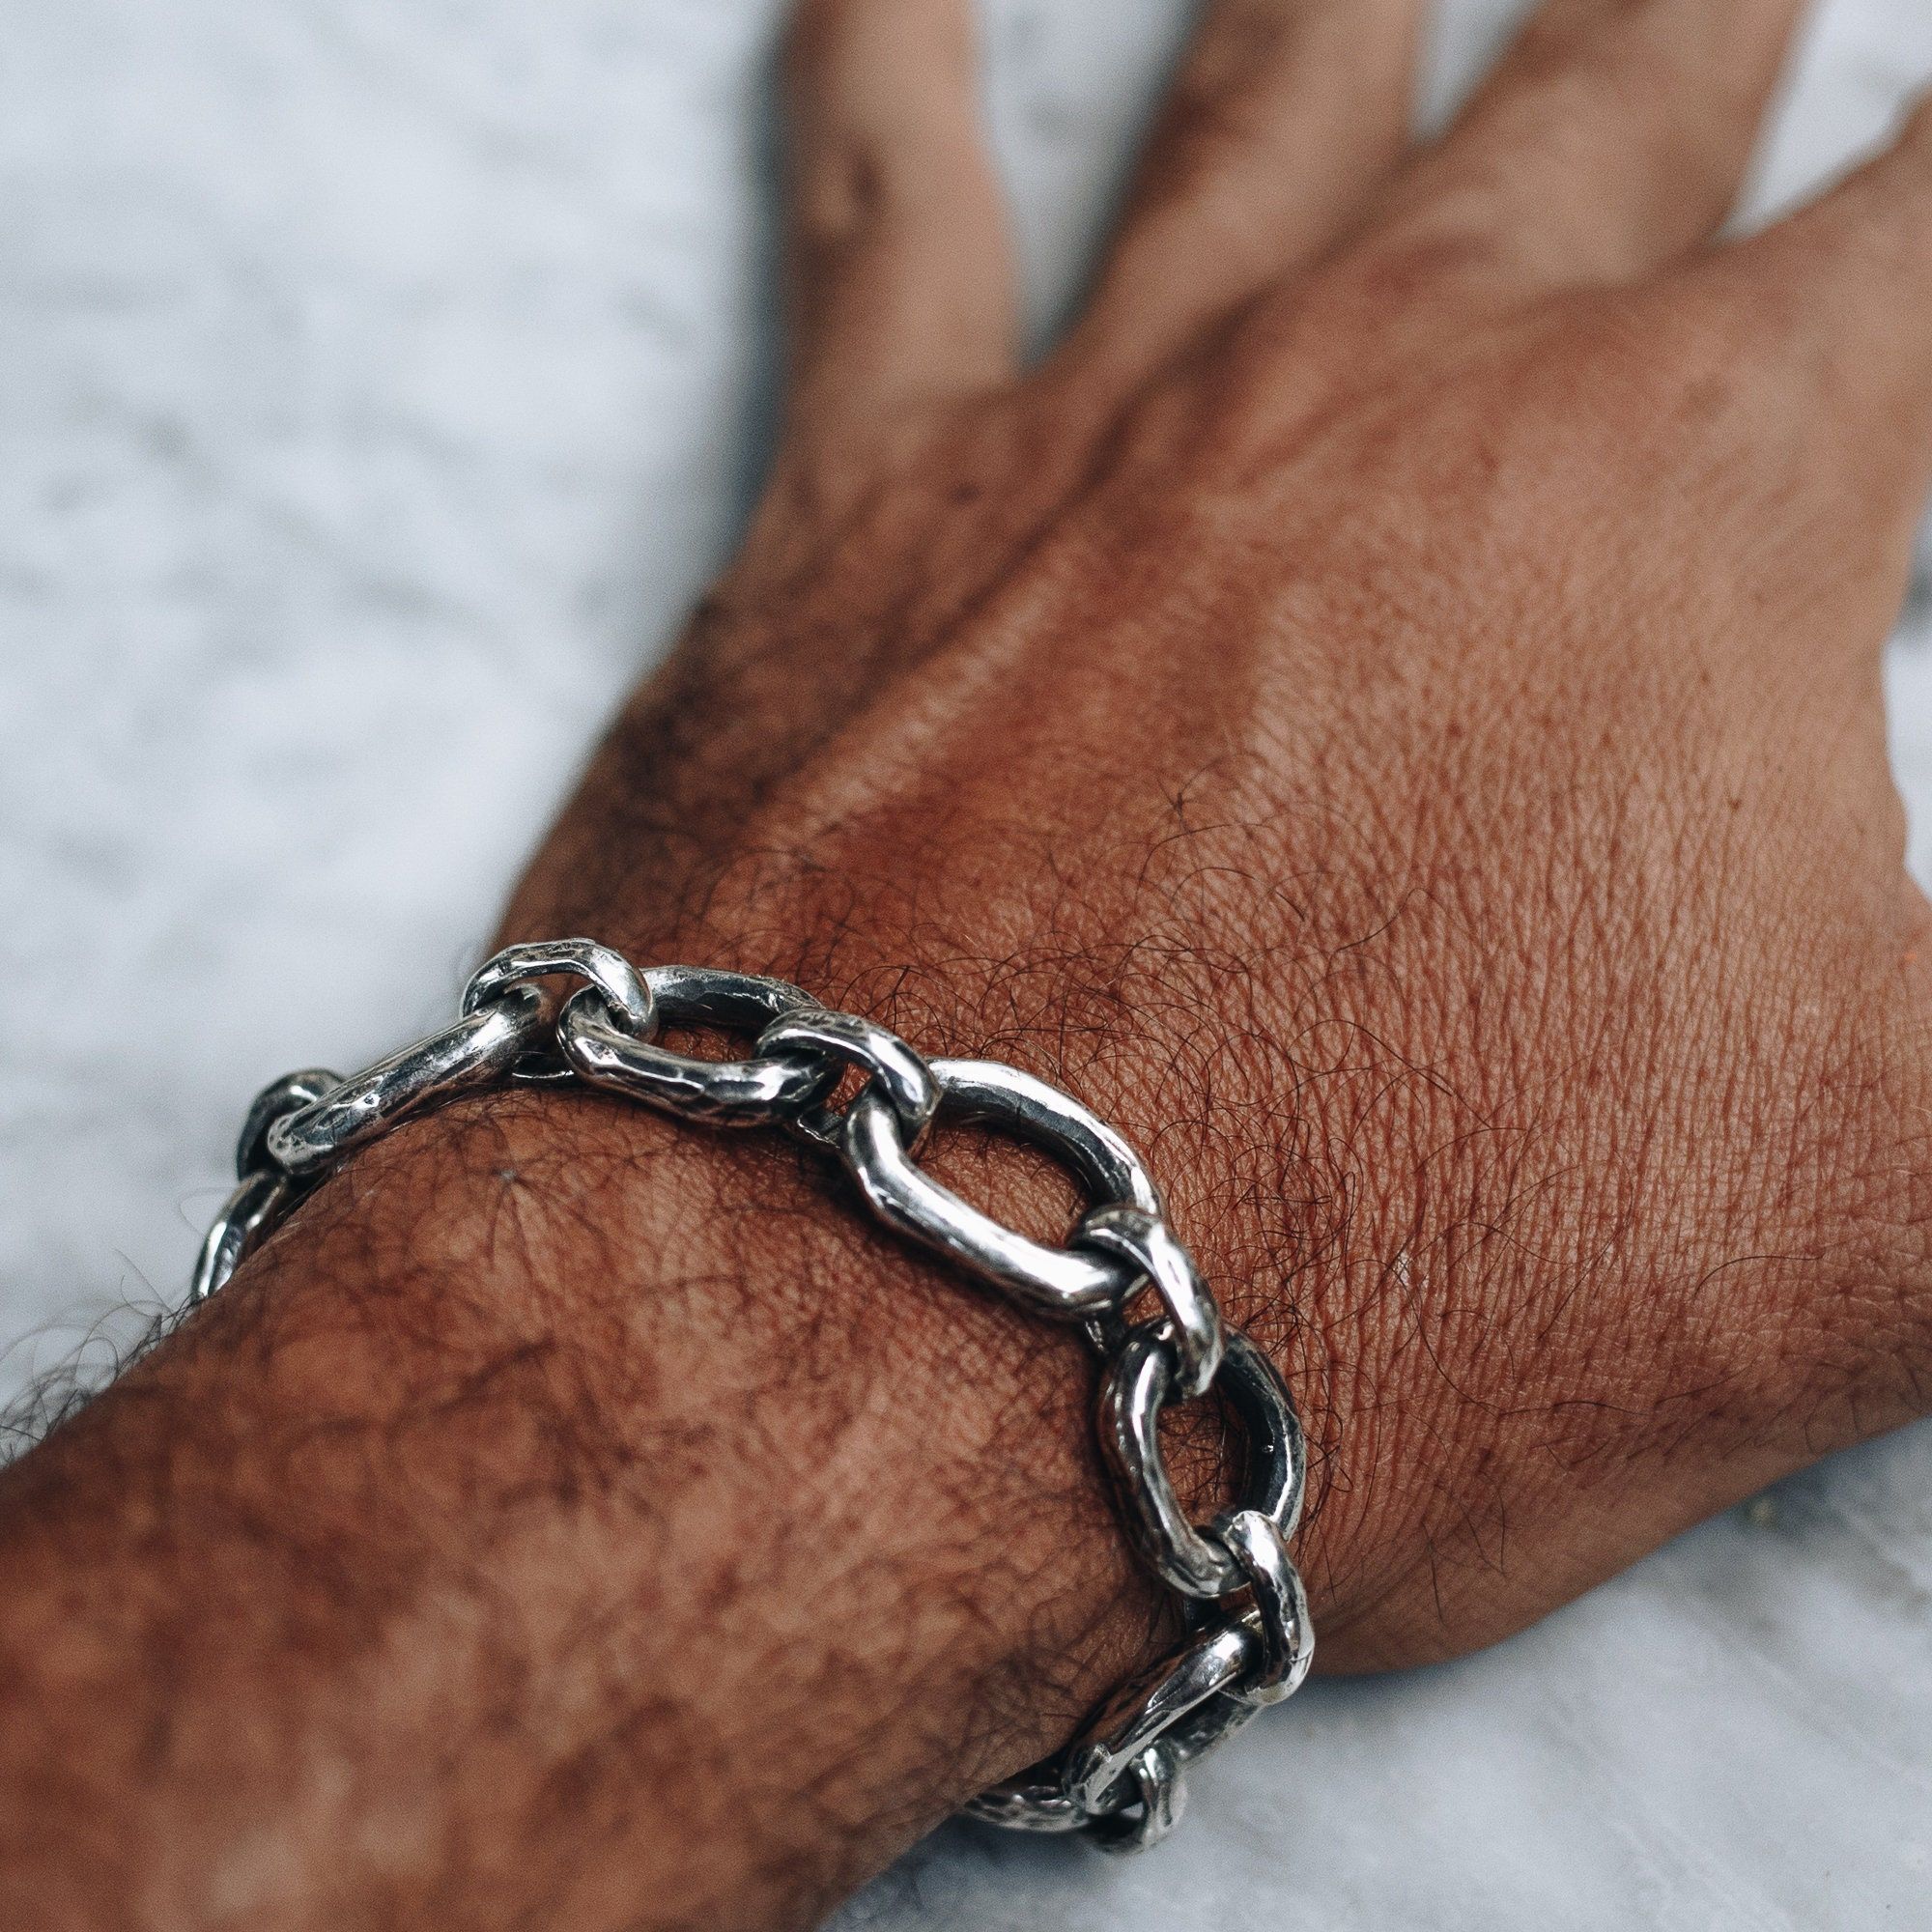 Silver Chains For Men